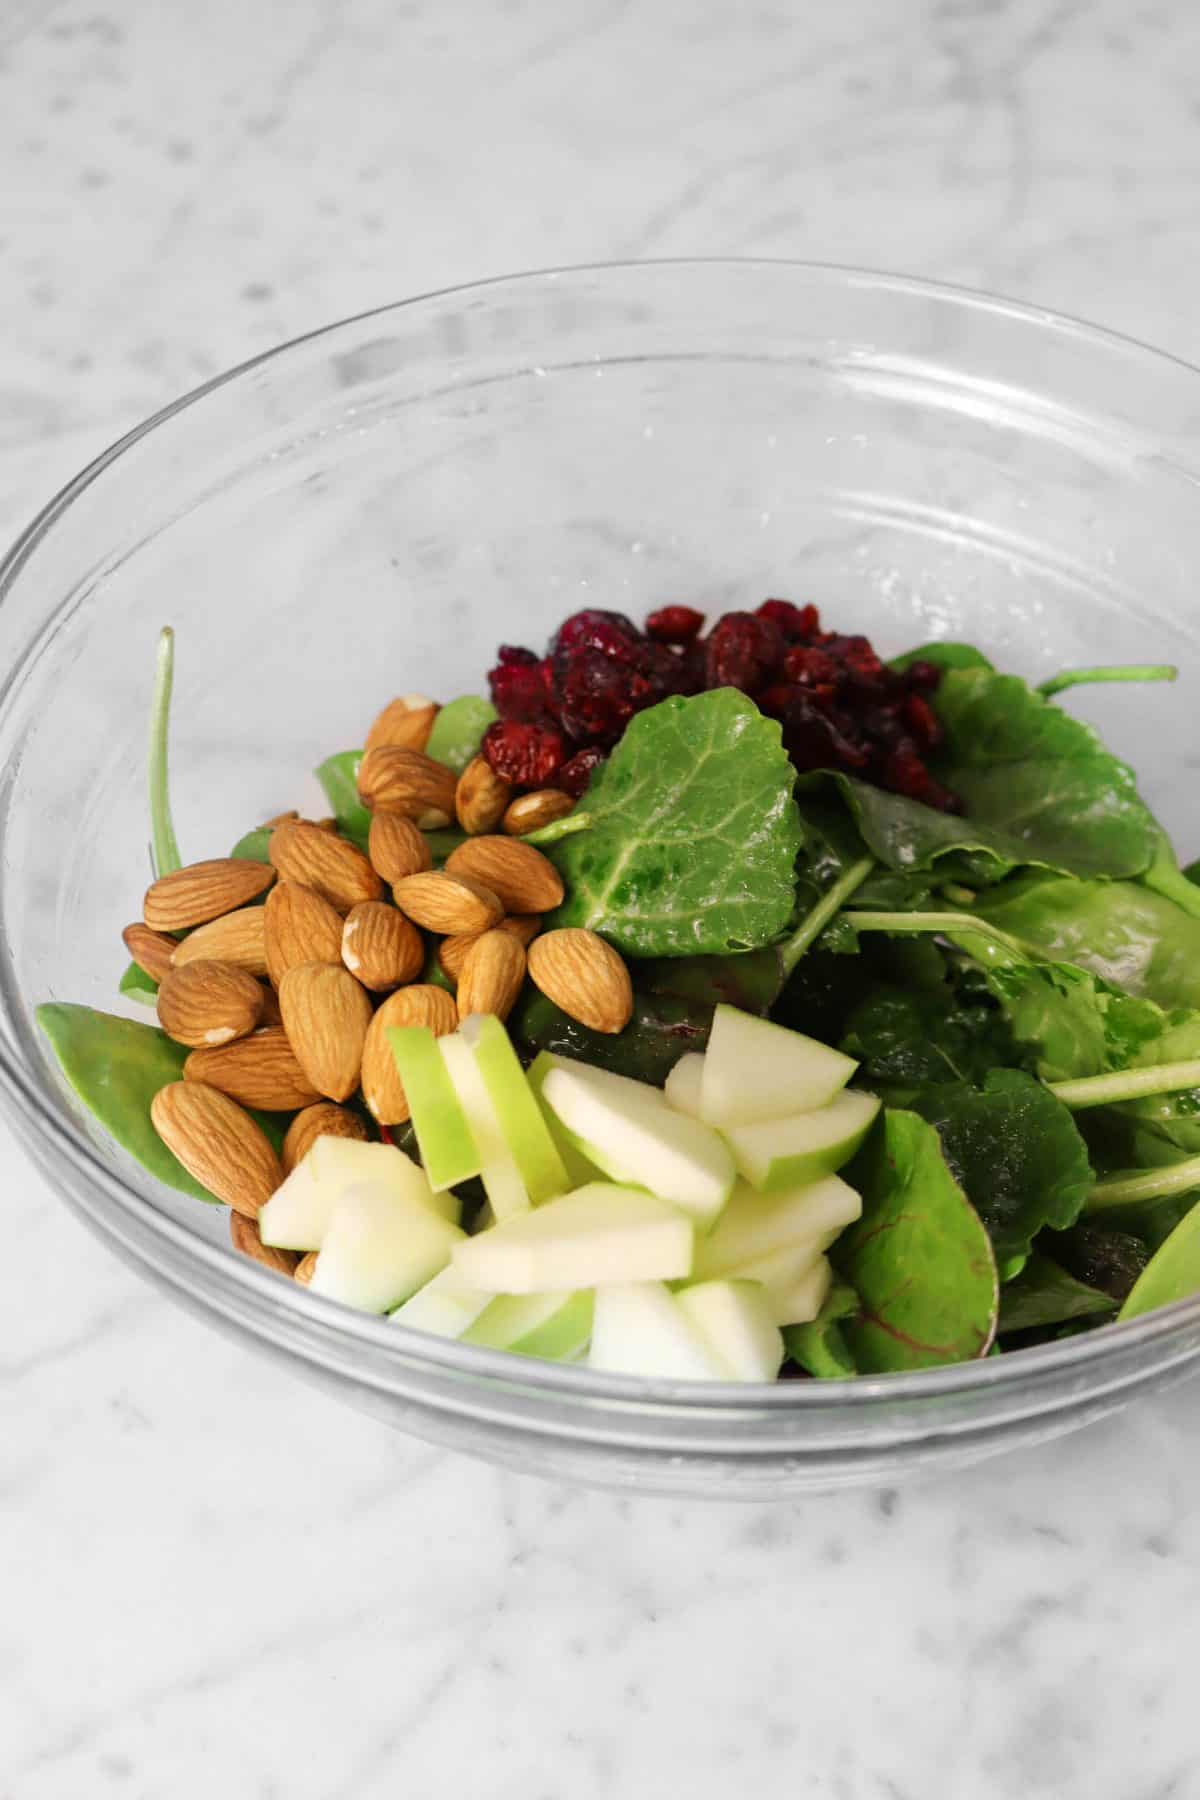 almonds, cranberries, and apples added to greens